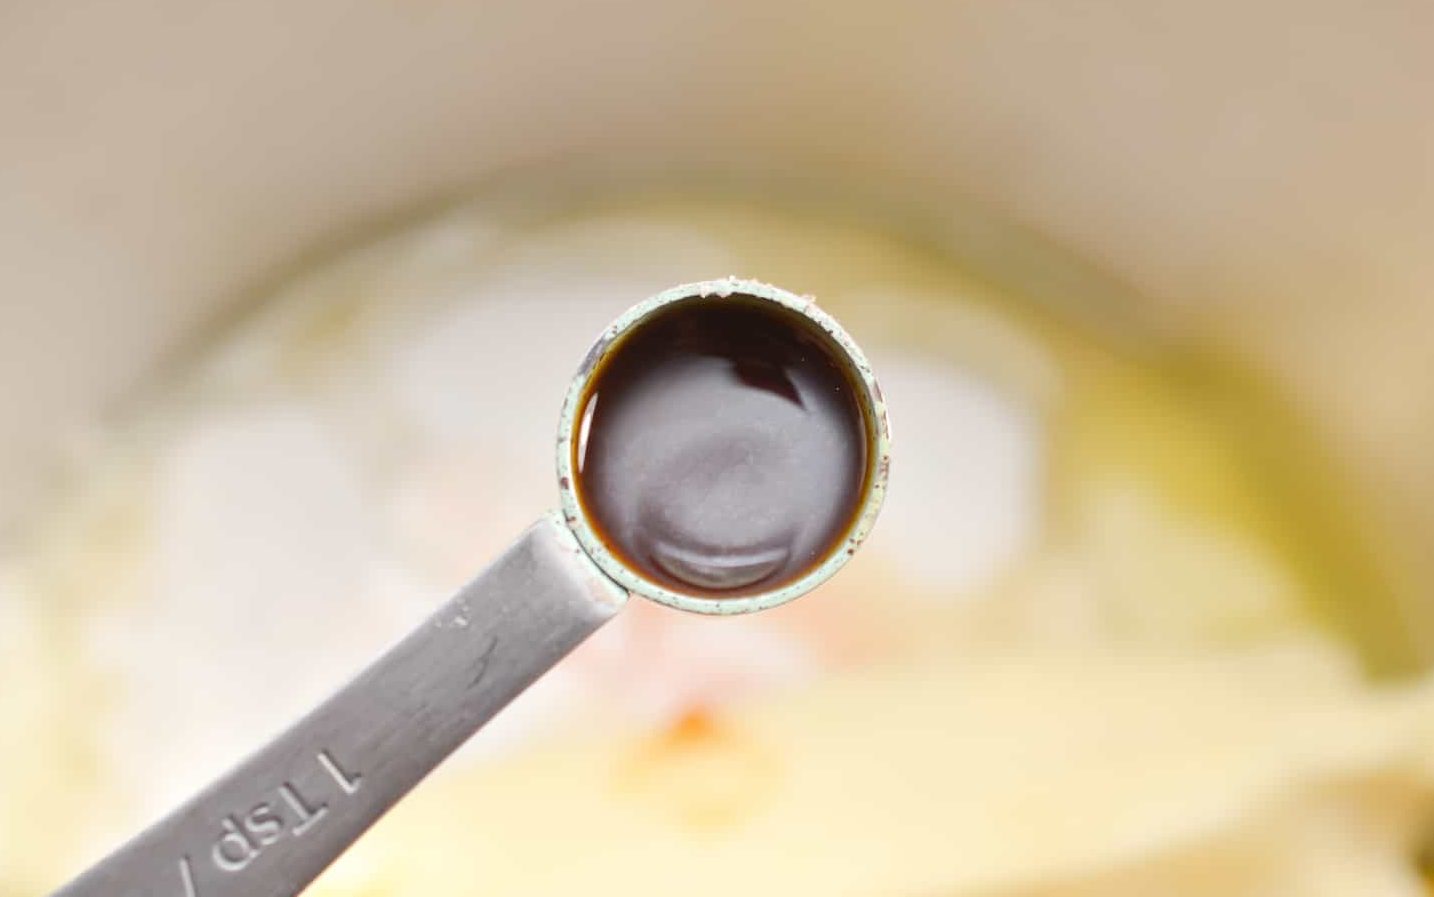 add ½ cup softened butter and 1 tsp of vanilla extract, and 2 large eggs.